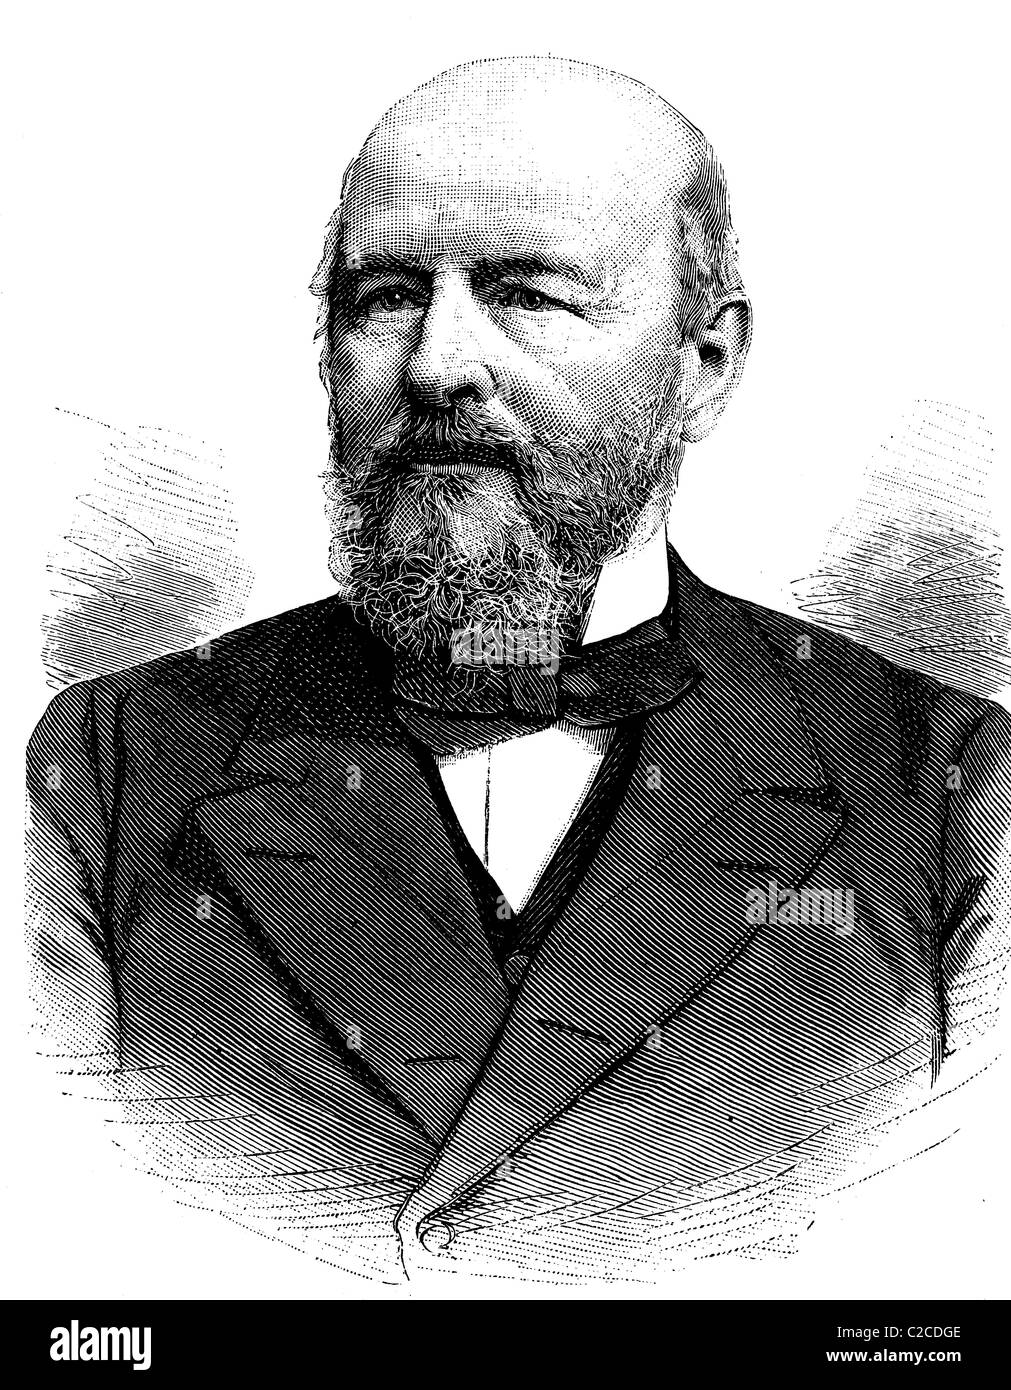 Botho Graf zu Eulenburg, 1831 - 1912, Prussian Prime Minister and Minister of the Interior, historical illustration circa 1893 Stock Photo